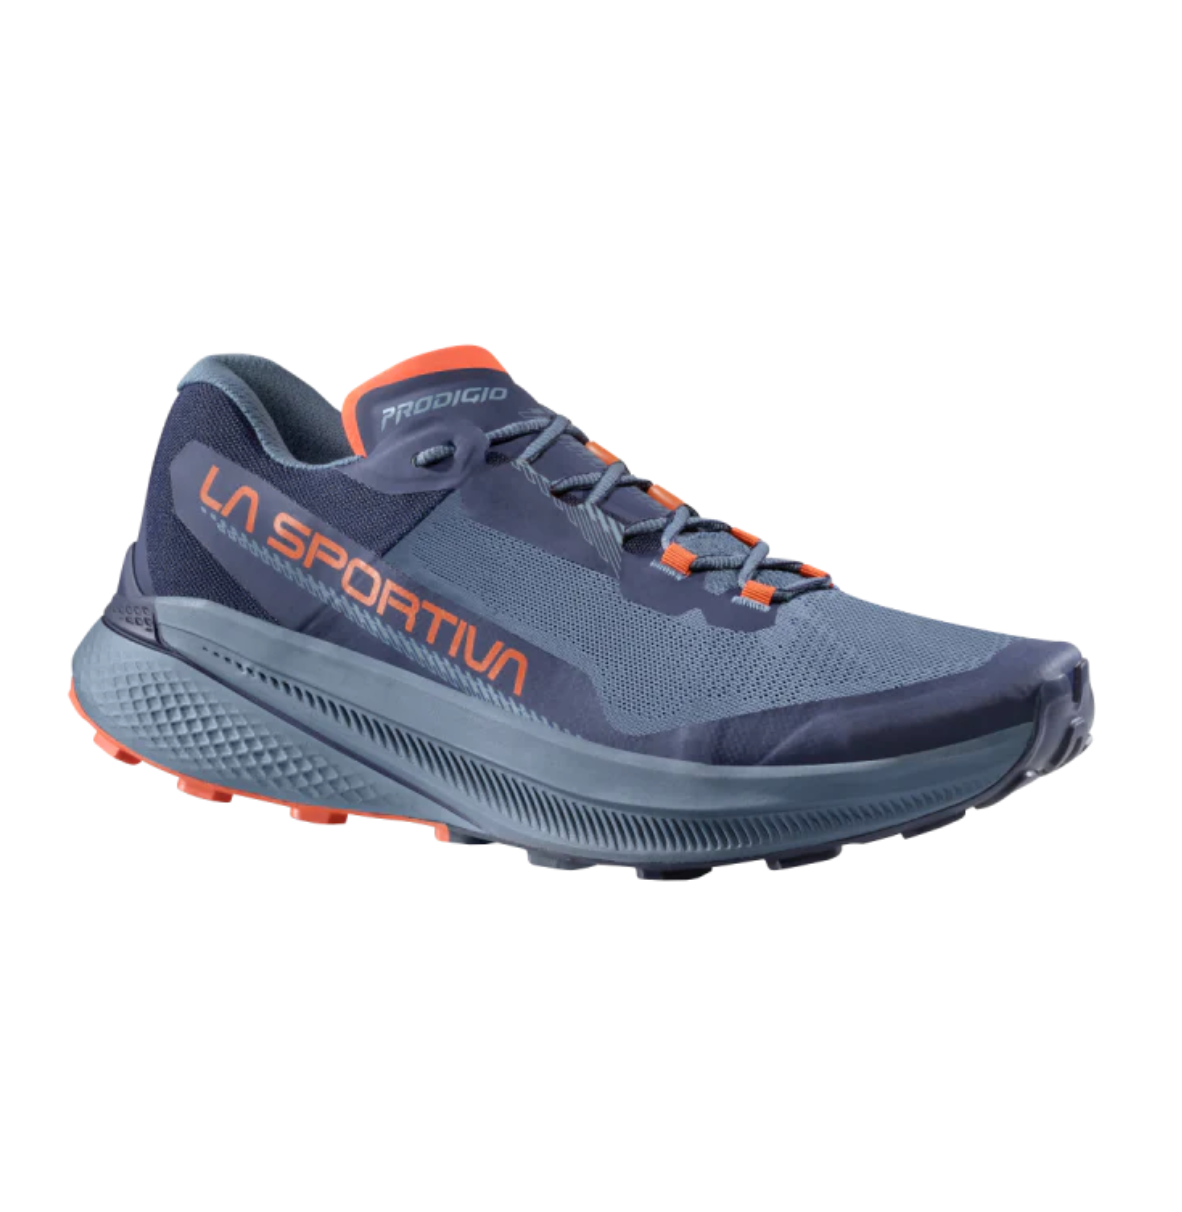 Centurion Running Store on X: Now back in stock! We now have all